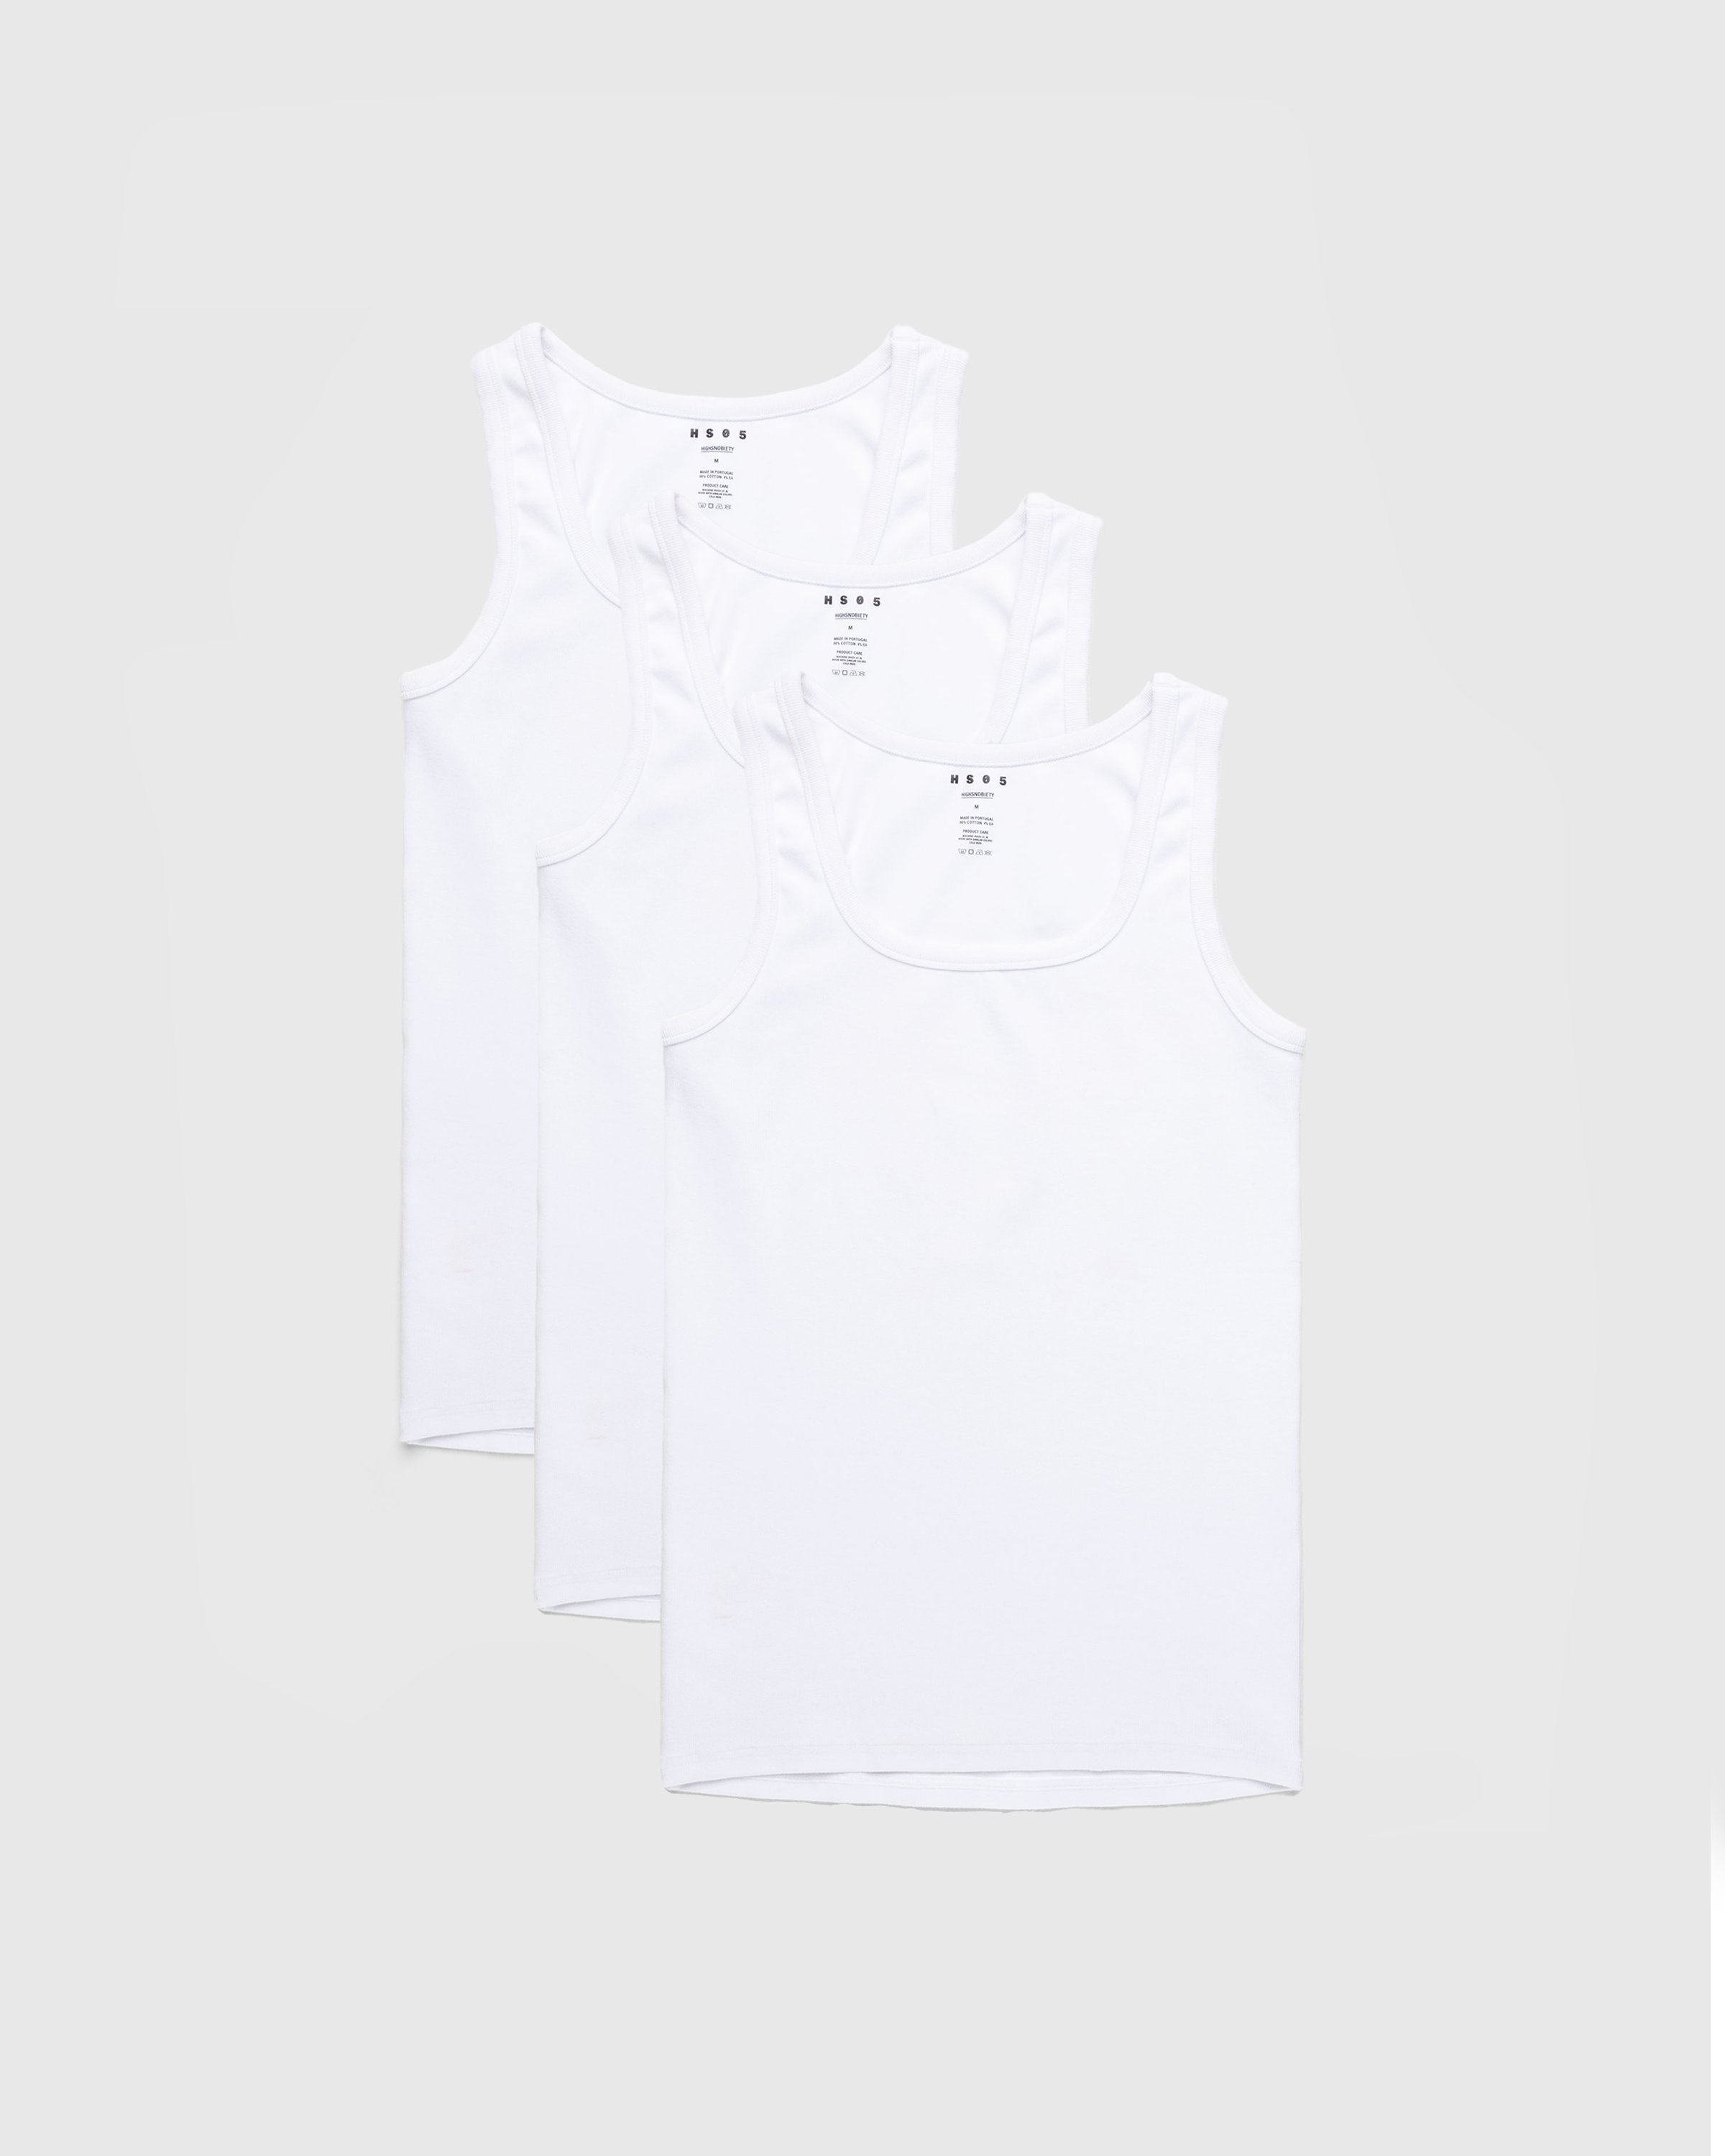 Highsnobiety HS05 – 3 Pack Heavyweight Tank Top White - Tops - White - Image 1